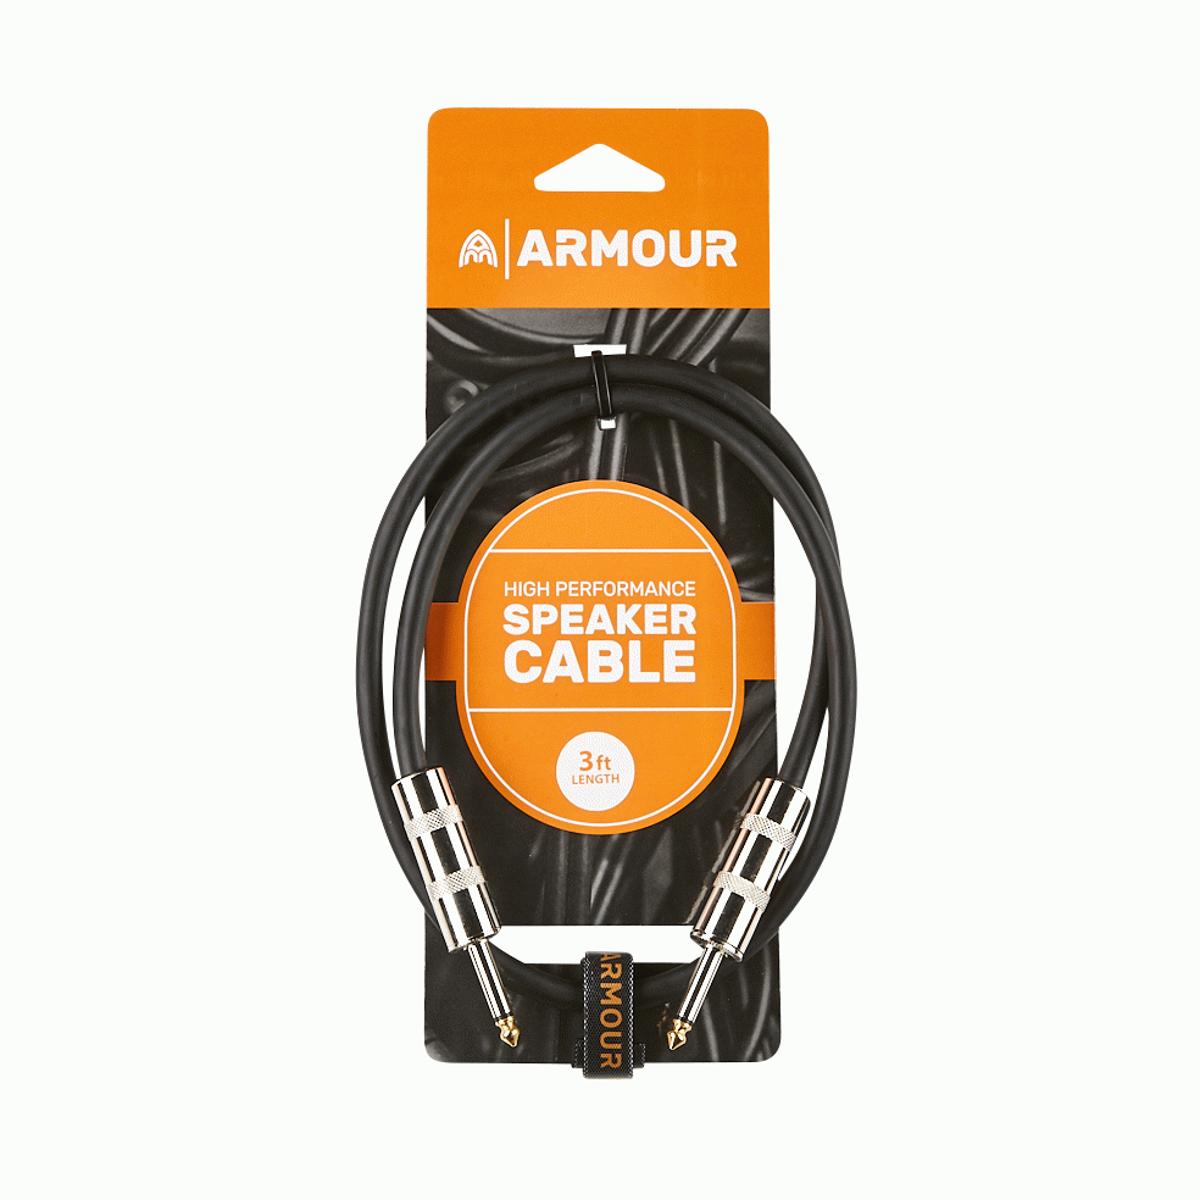 Armour SJP3 Speaker Cable 3ft Jack to Jack